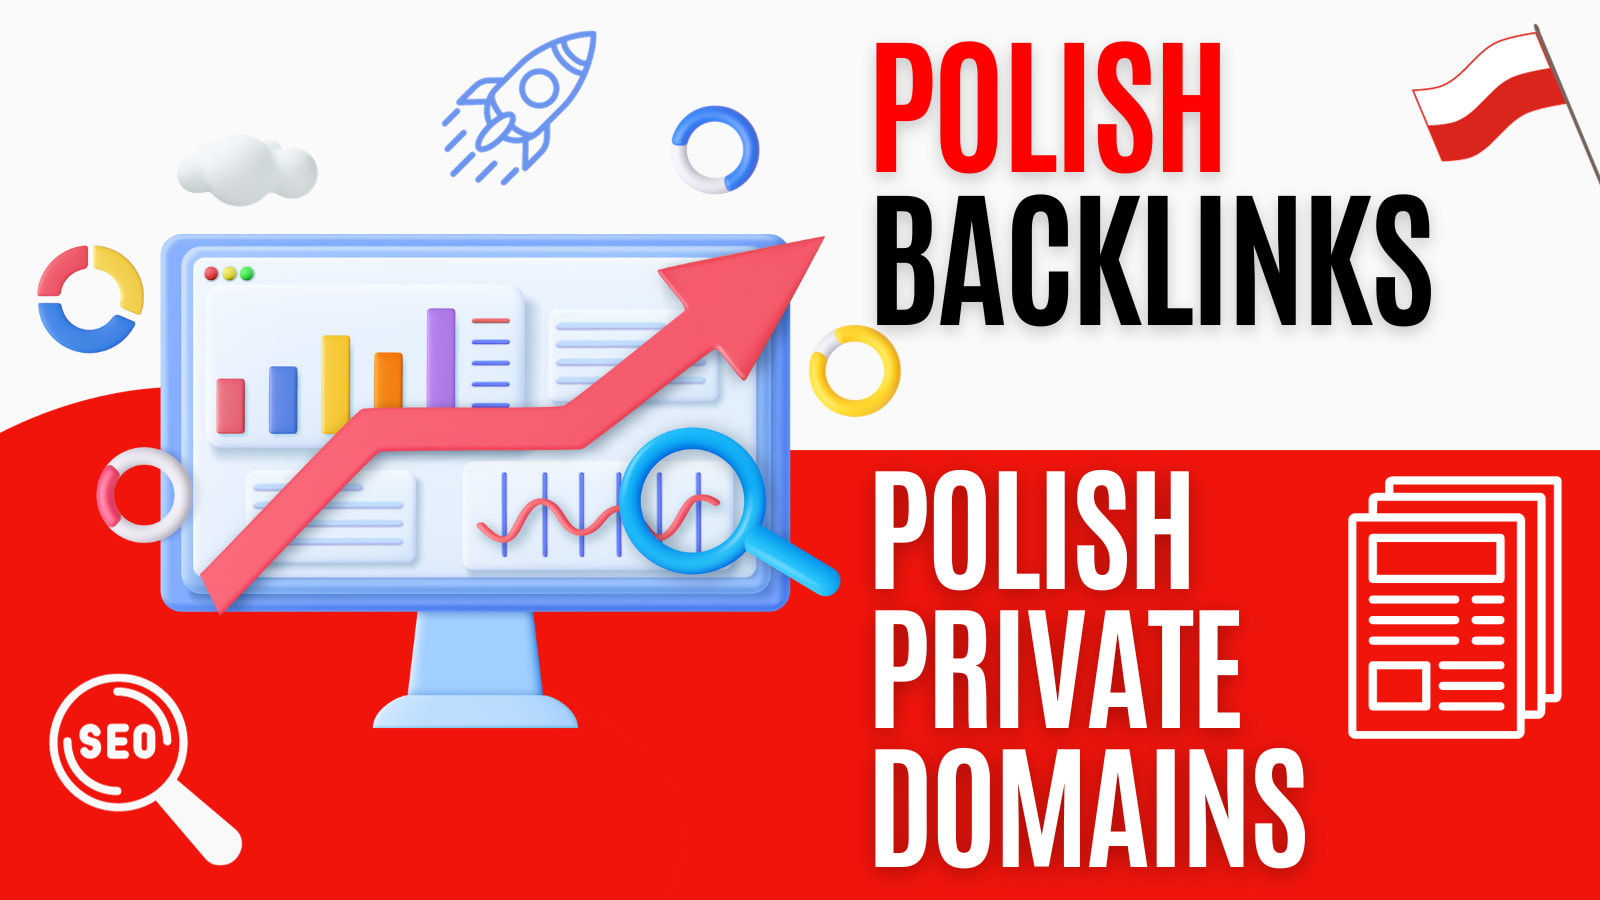 I will 10 guest post on polish poland websites